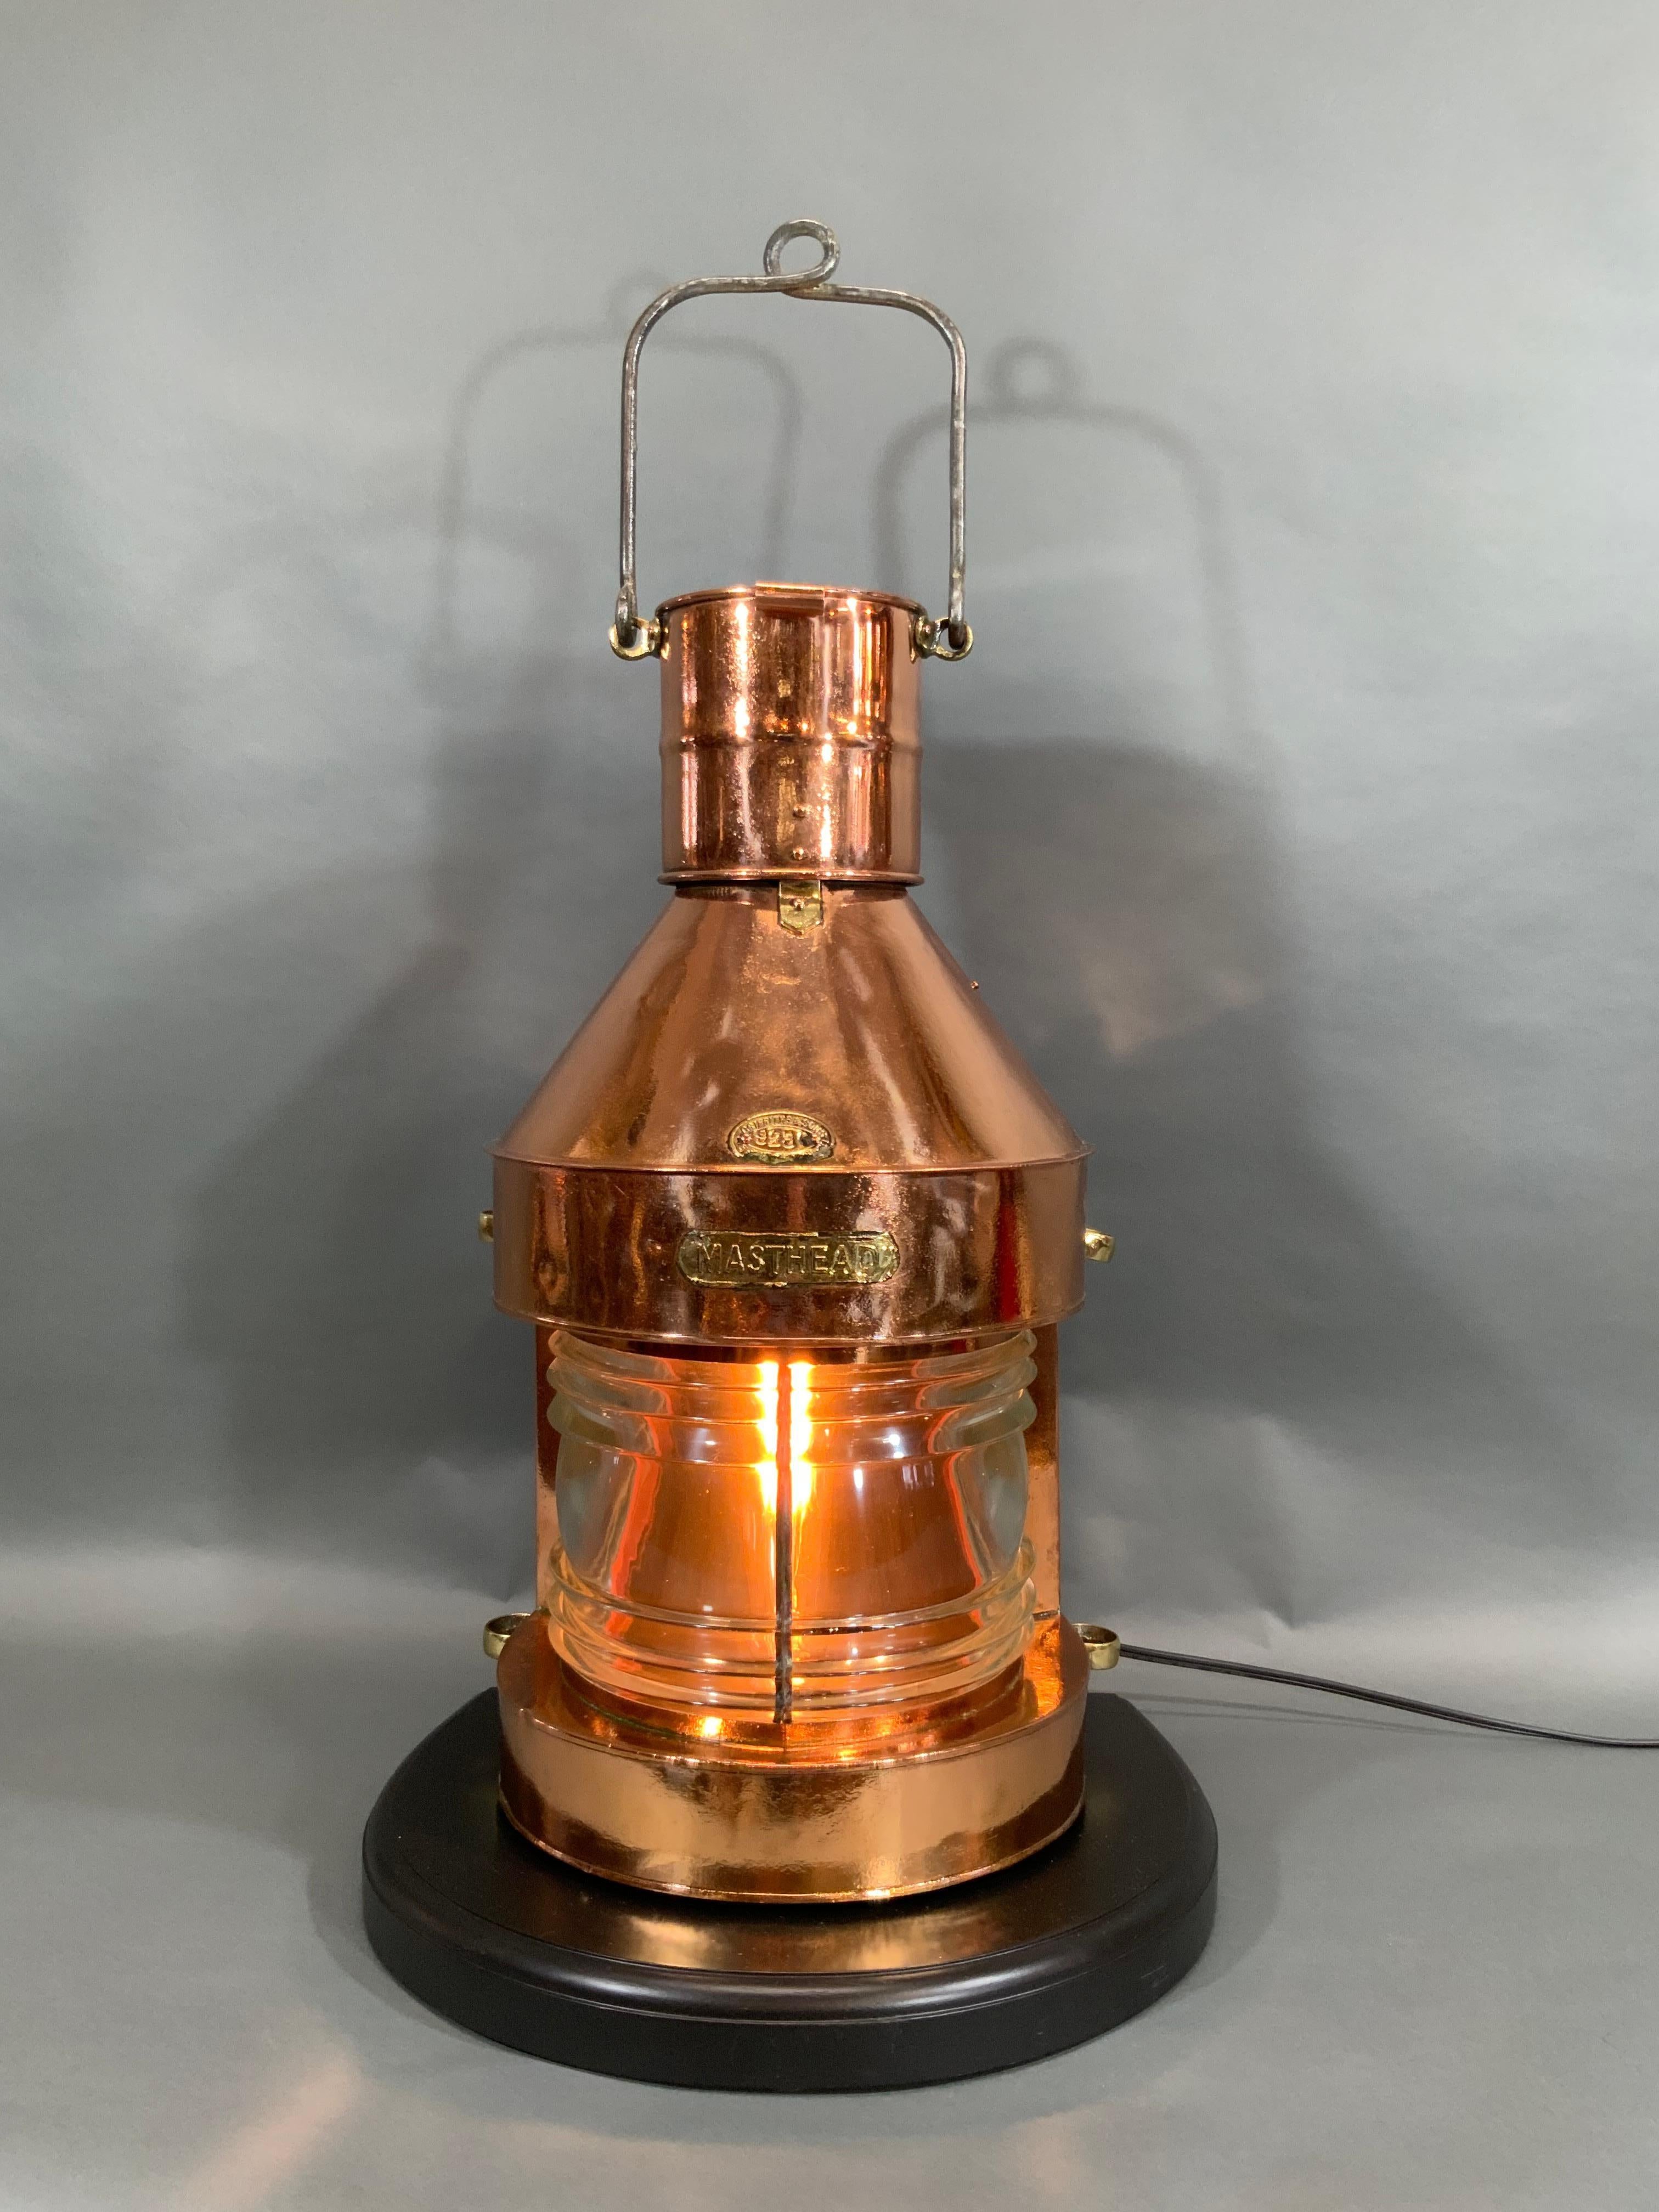 Ship's lantern known as a masthead lantern with Fresnel glass lens. Meticulously polished and lacquered, and wired with electric cord for home use. With chandler's badge from Griffiths and Sons of Birmingham, England. Also has a brass 